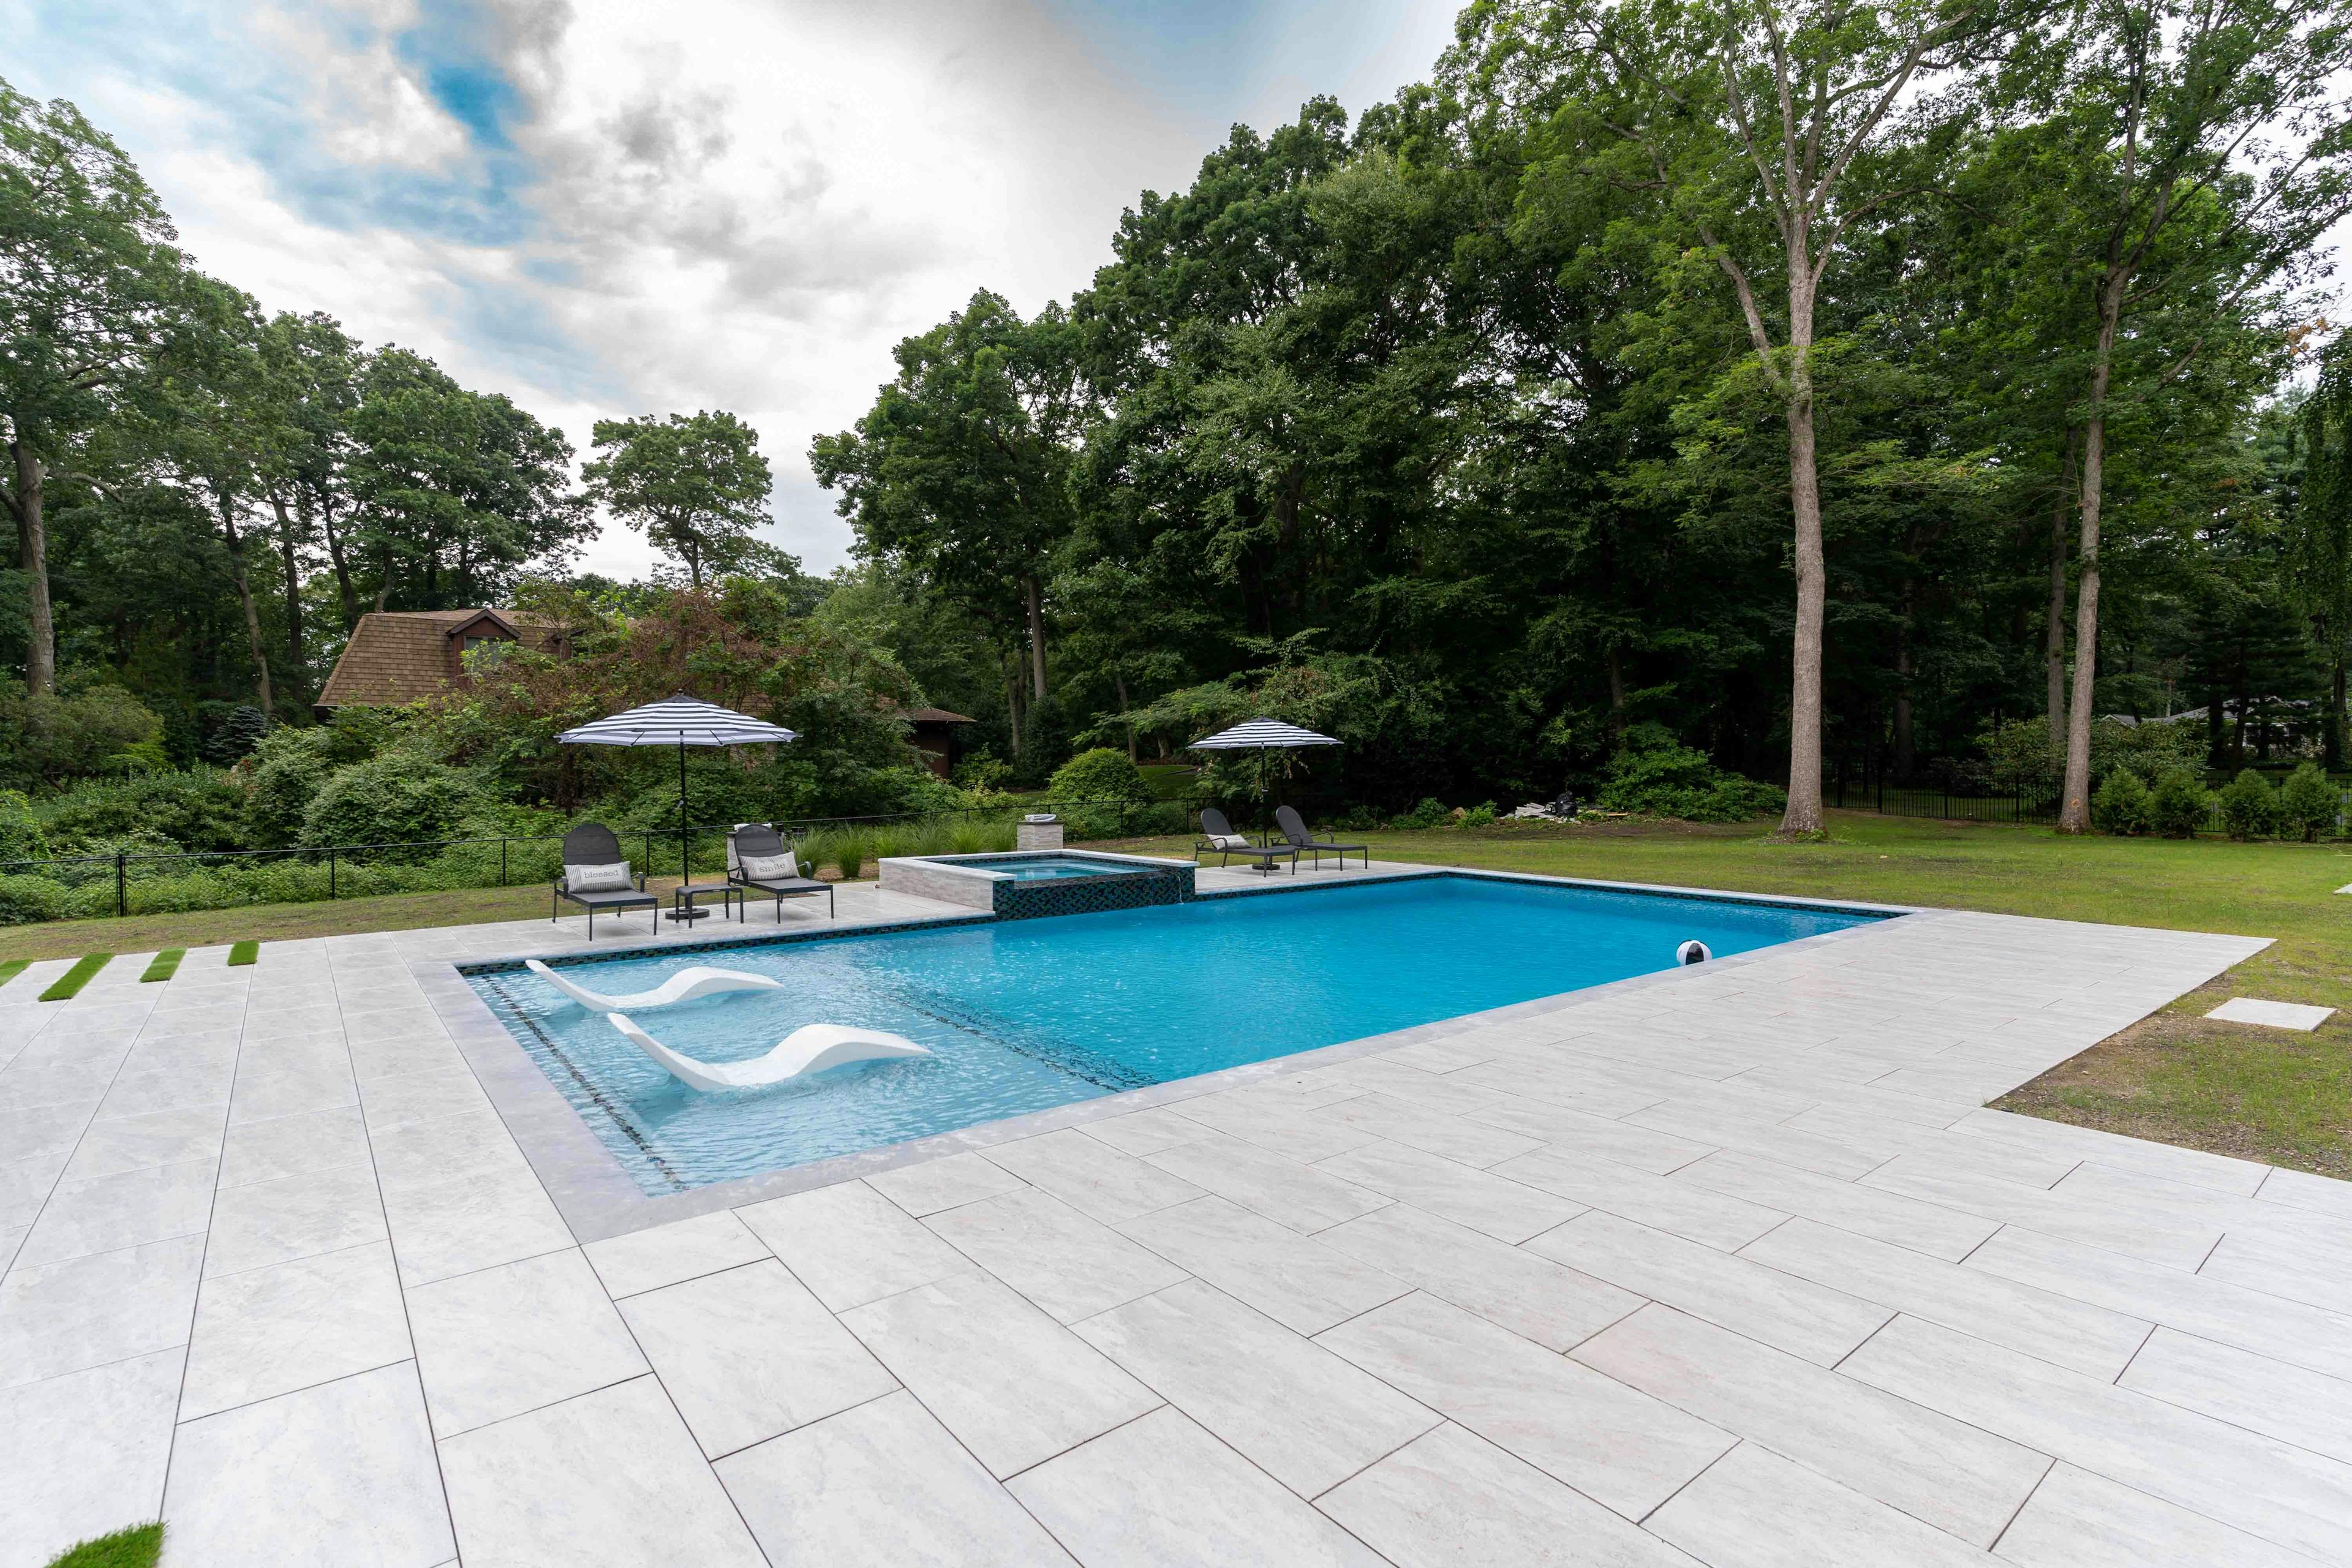 Gunite Pool and Outdoor Kitchen in Syosset, NY